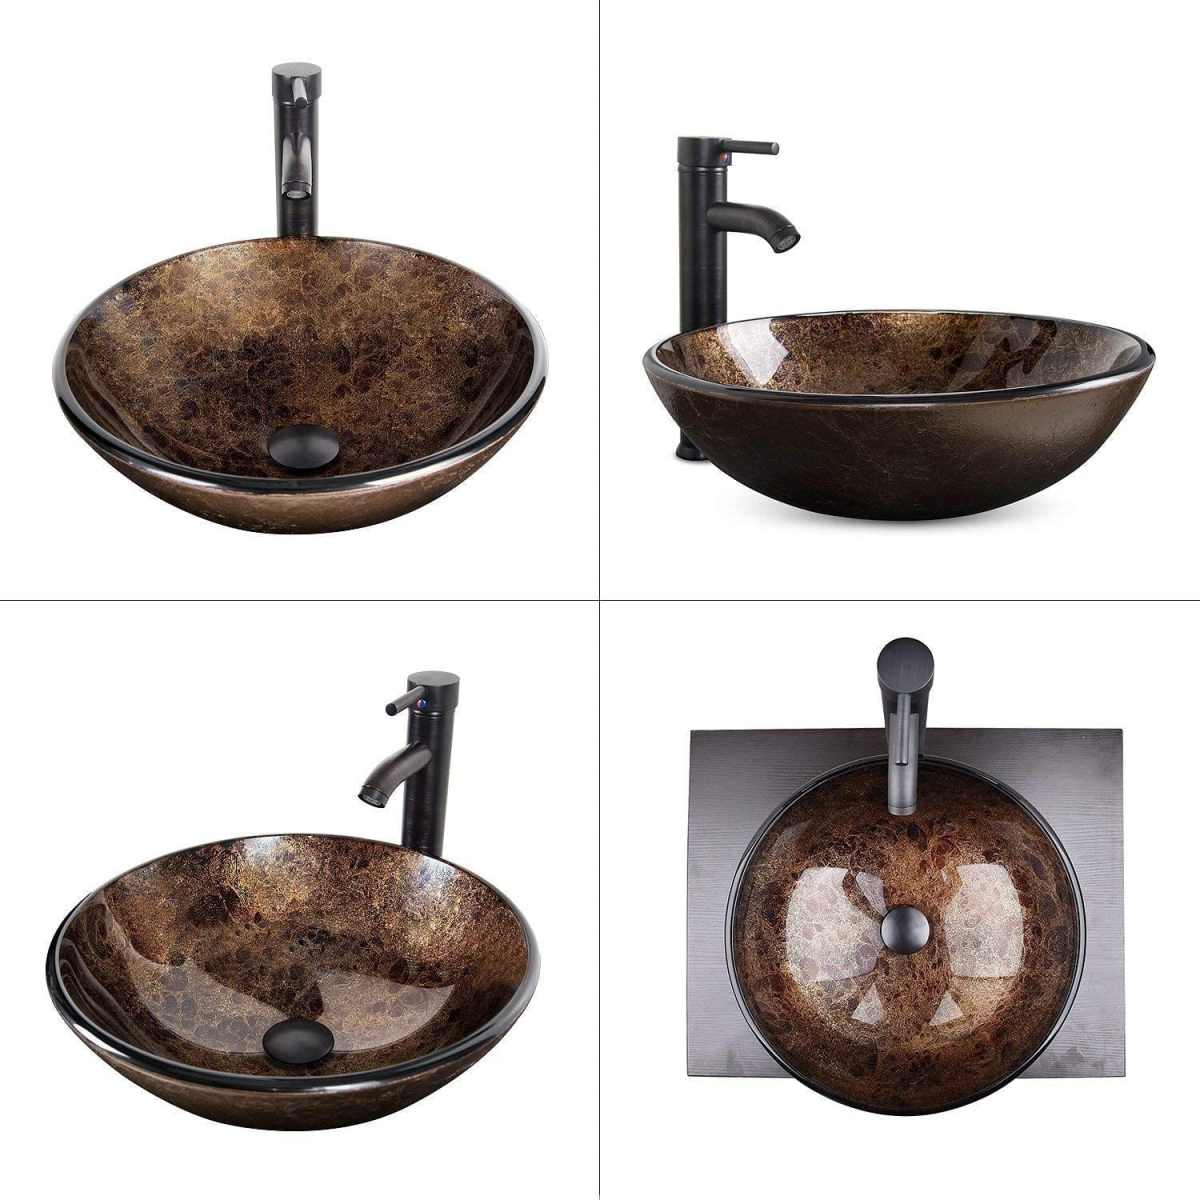 Four angle views of Elecwish brown round sink